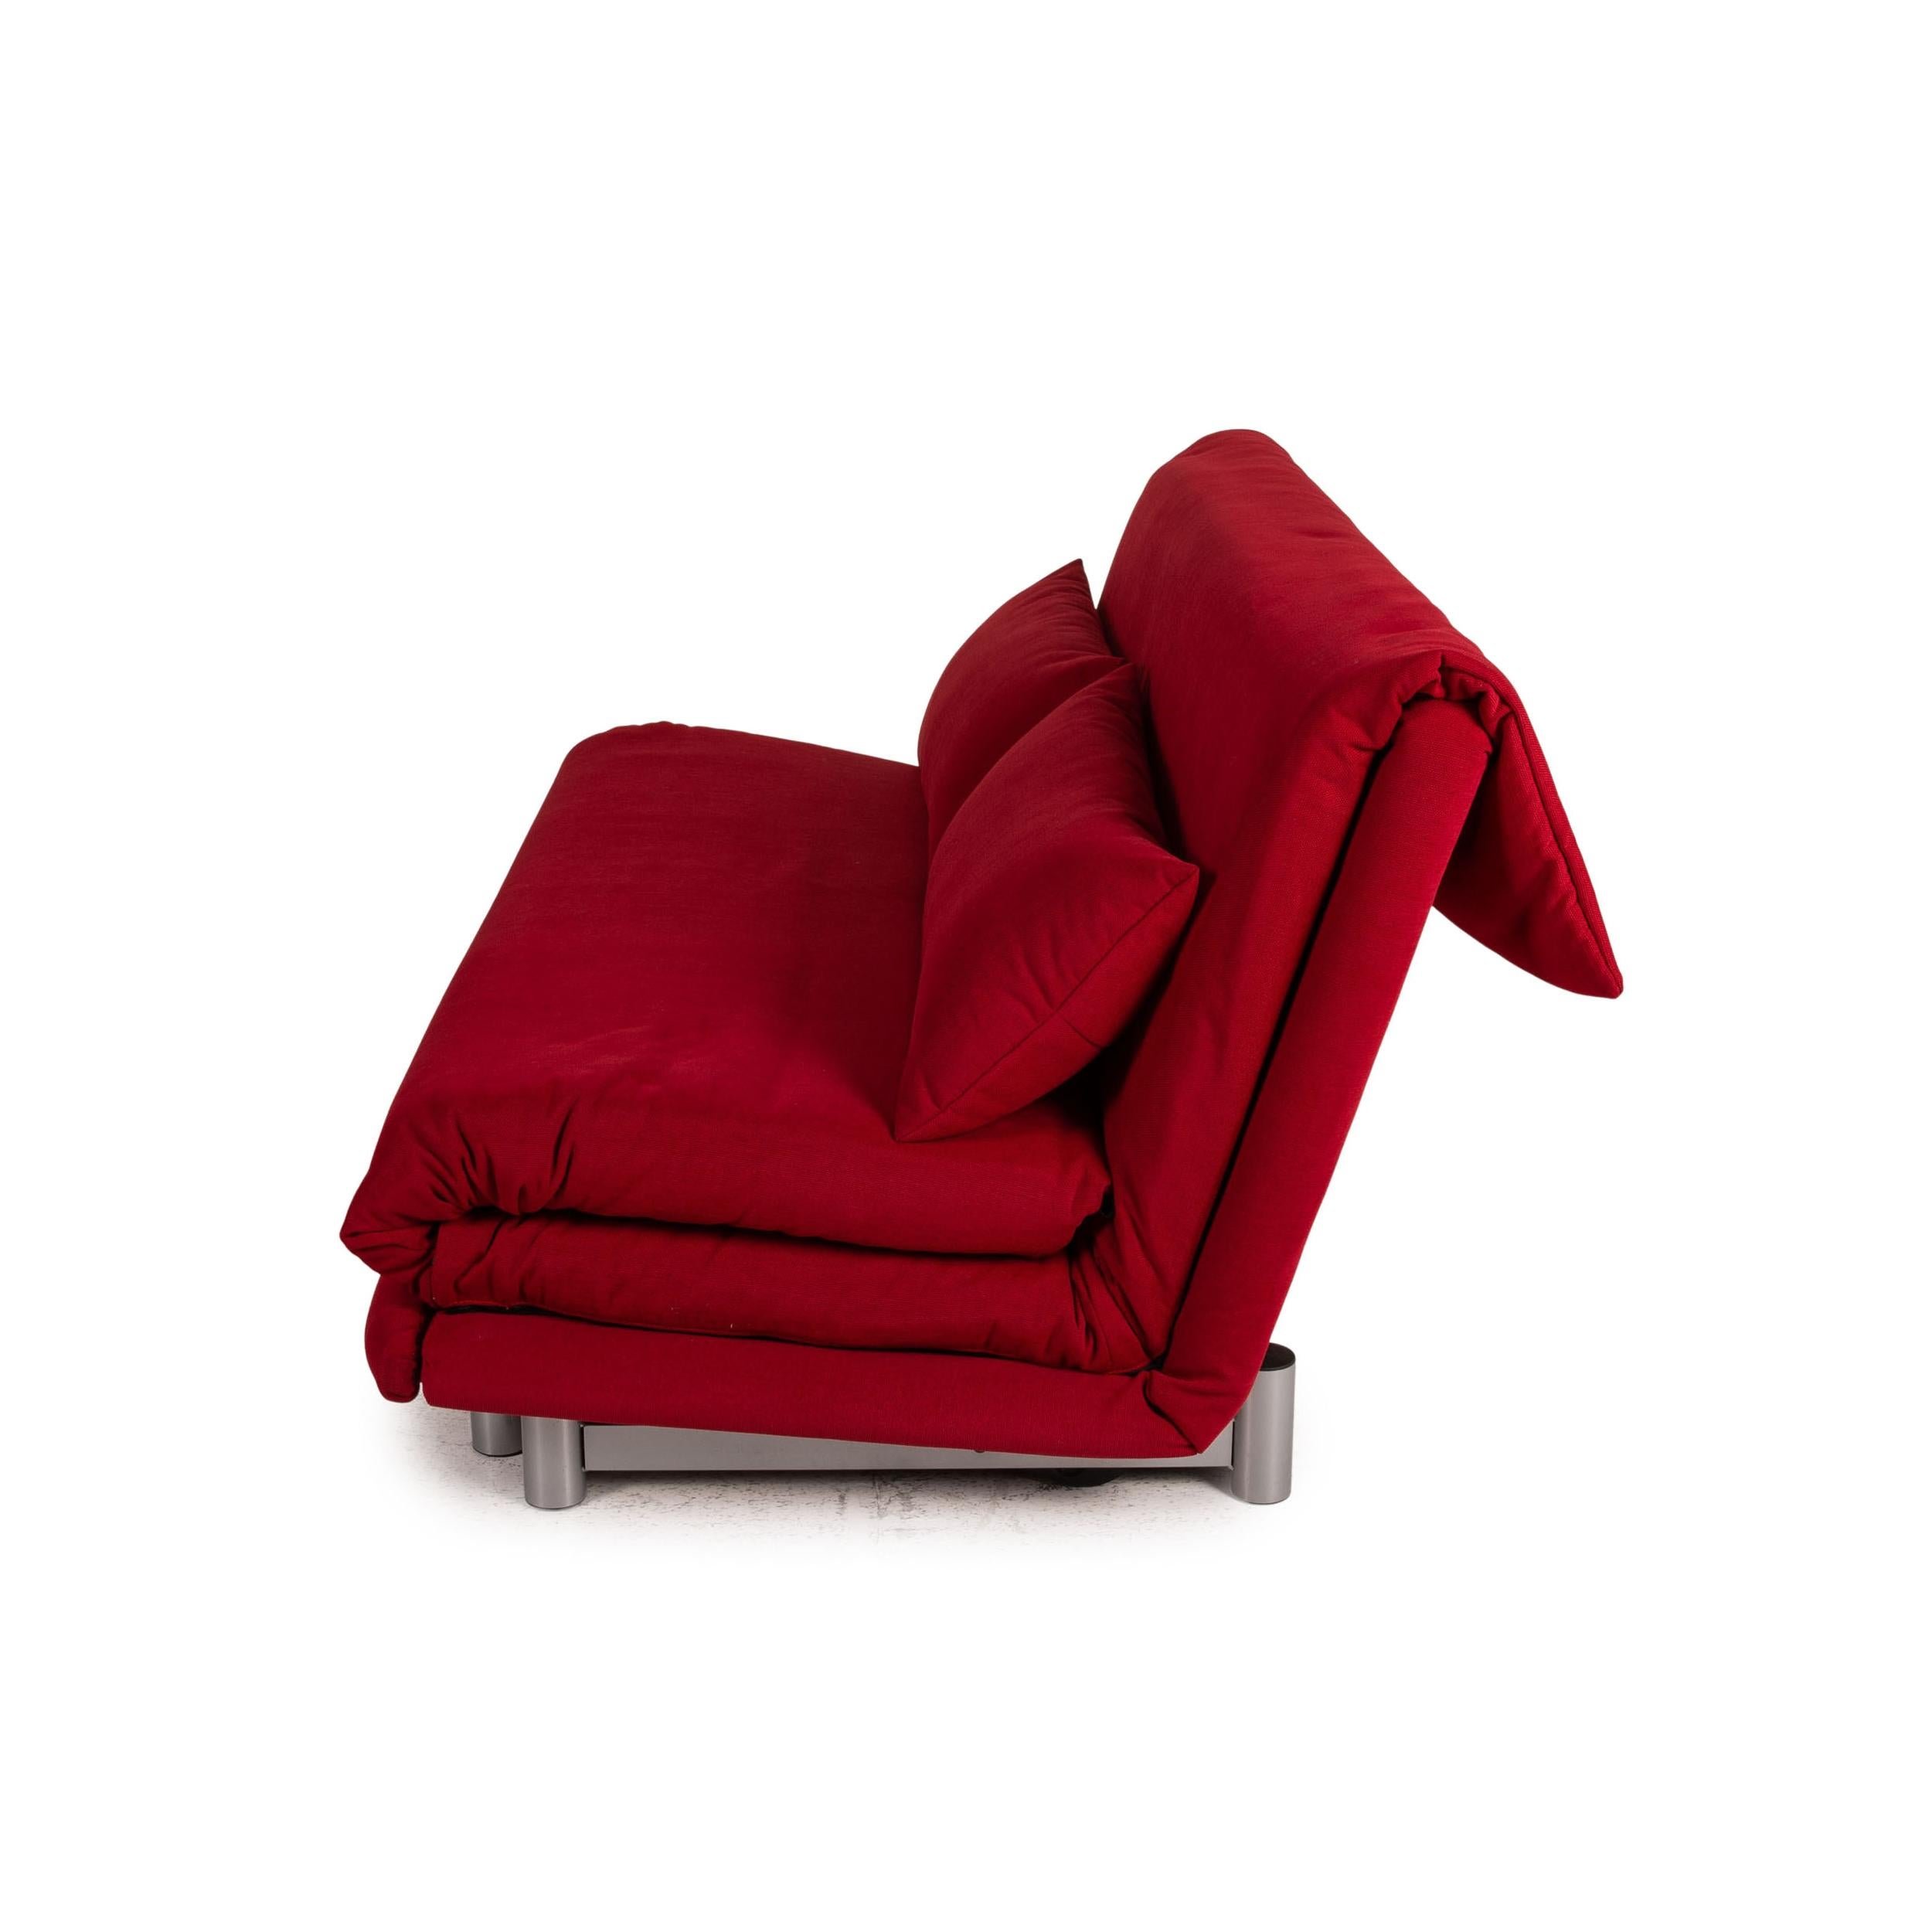 Ligne Roset Multy Fabric Sofa Bordeaux Two-Seater Couch Function Sleeping 3